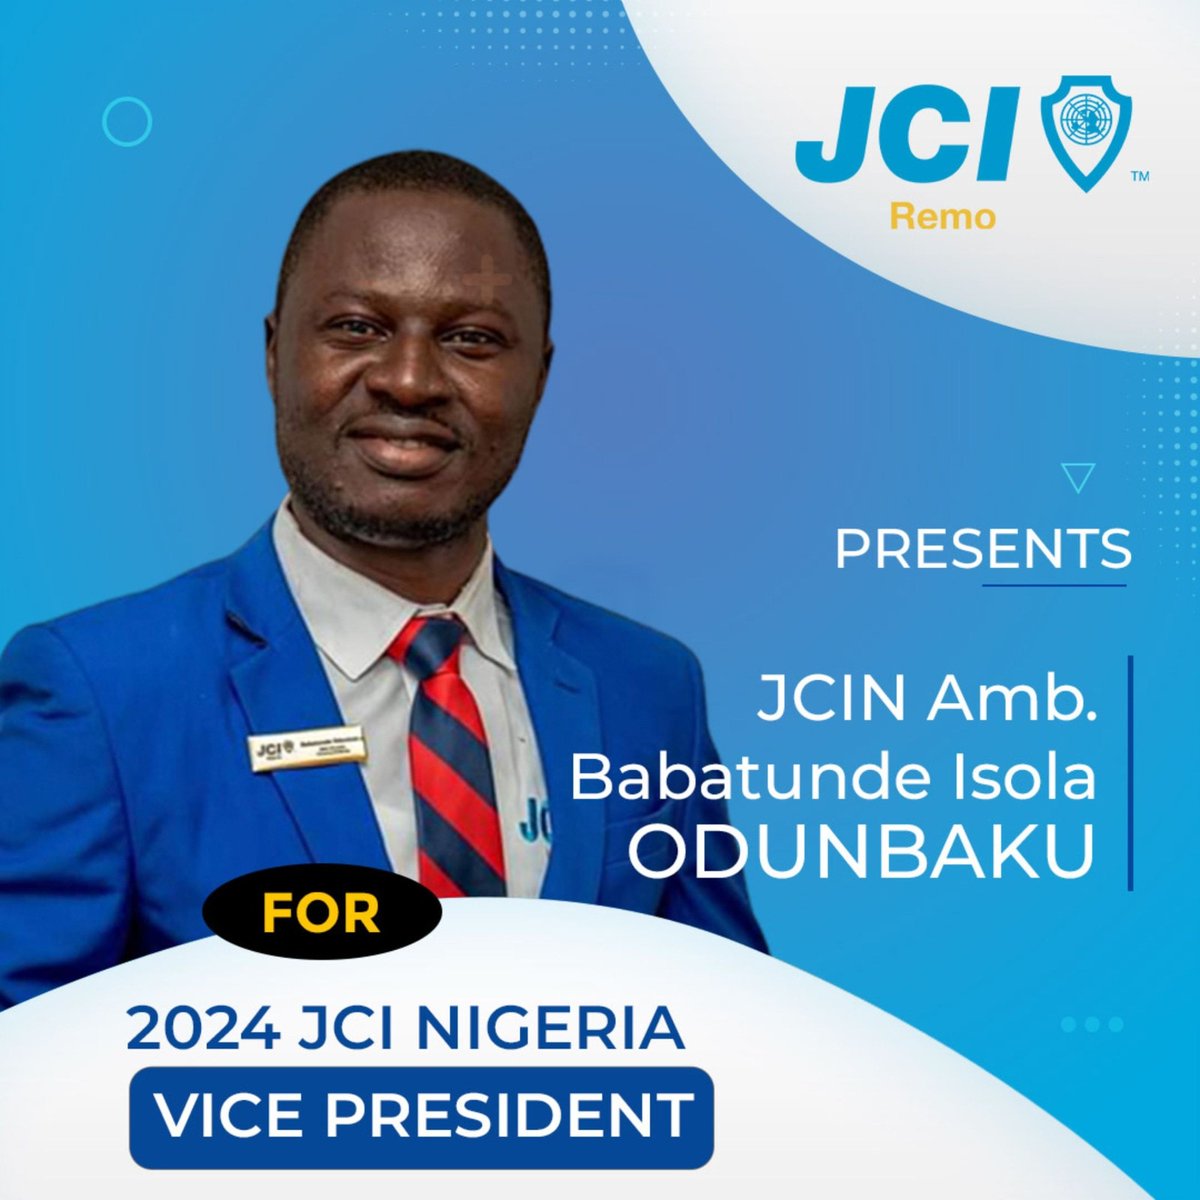 Our action not only springs from our thought, but from a readiness for responsibility.

As we all journey through this noble course, growing together is inevitable. 

 If we can conceive it, we can do it ✌️

#ABO2024
#CommittedToServe
#JCI
#JCINigeria 
#AsiwajuBabatundeOdunbaku